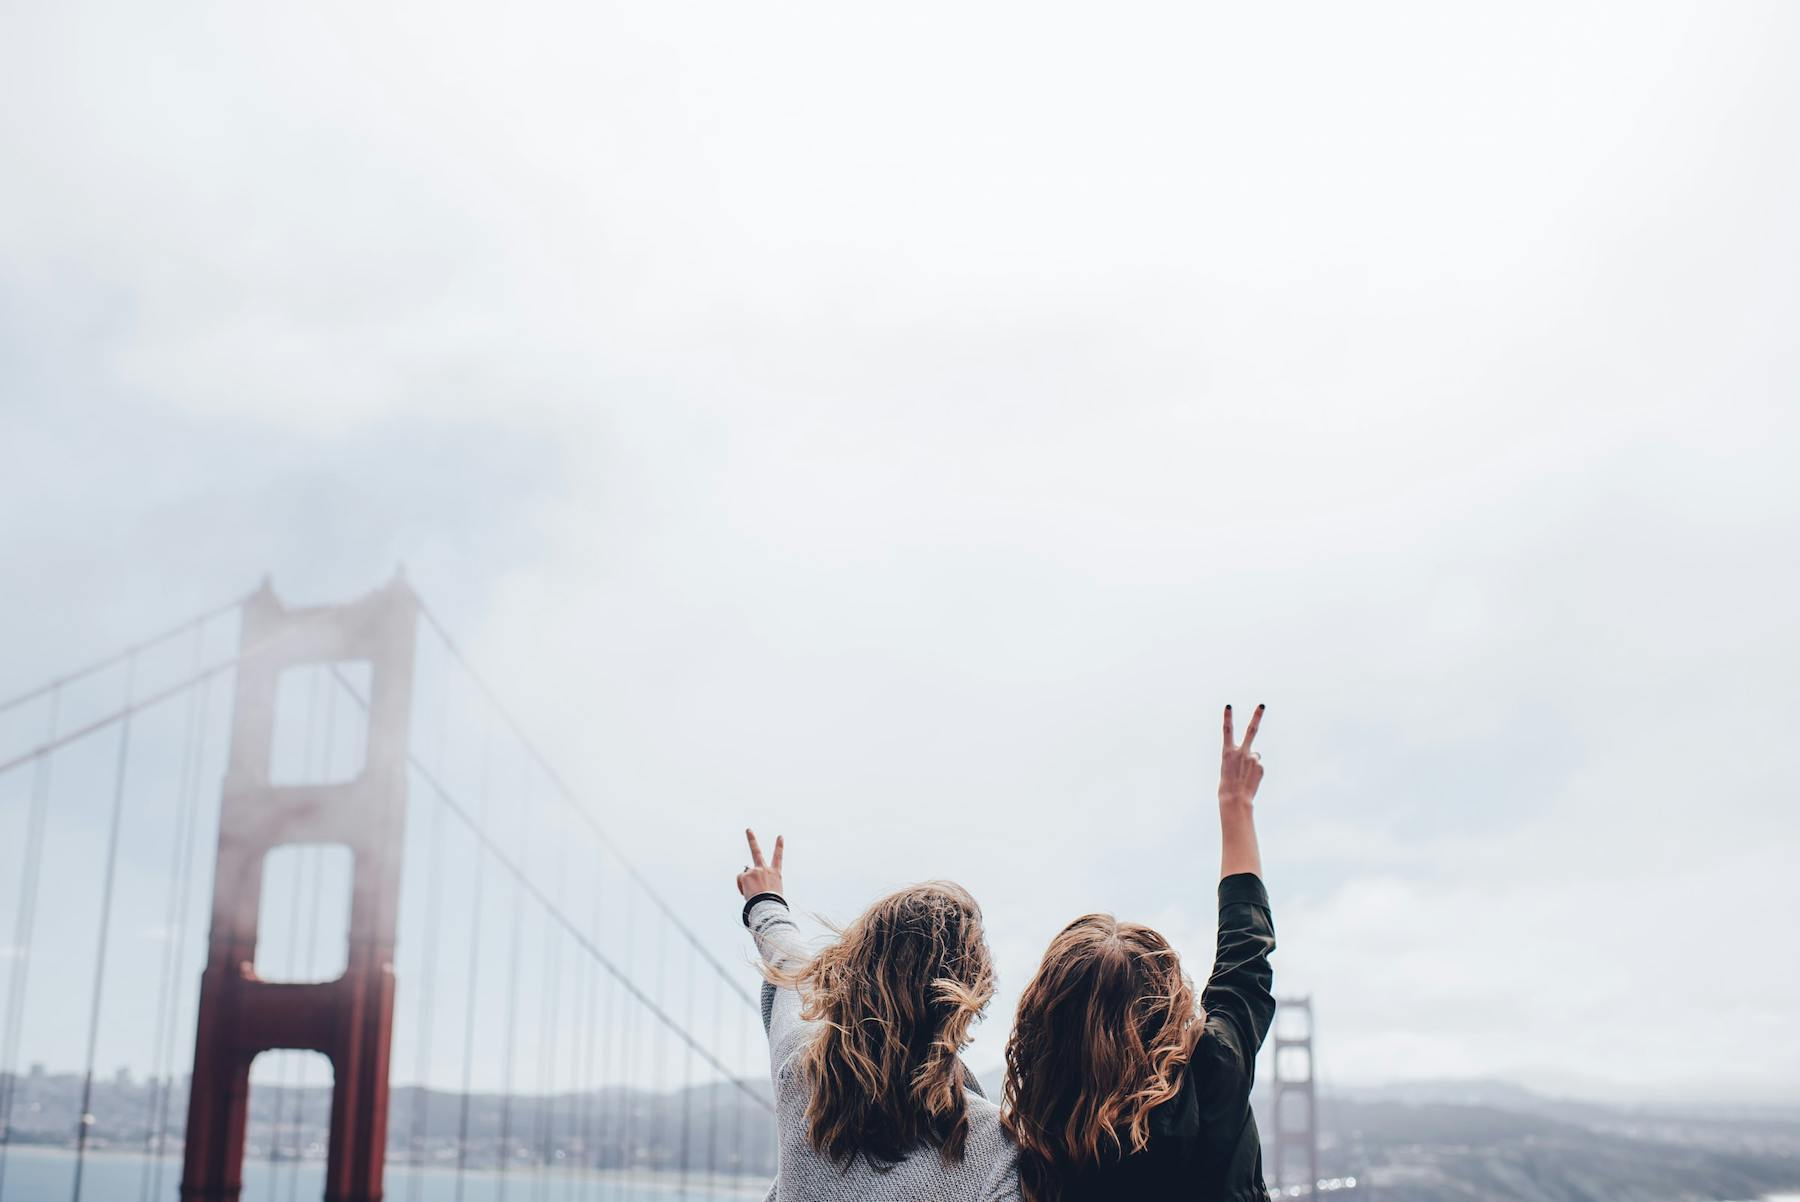 Two women making the peace sign by the Golden Gate Bridge, San Francisco, United States.